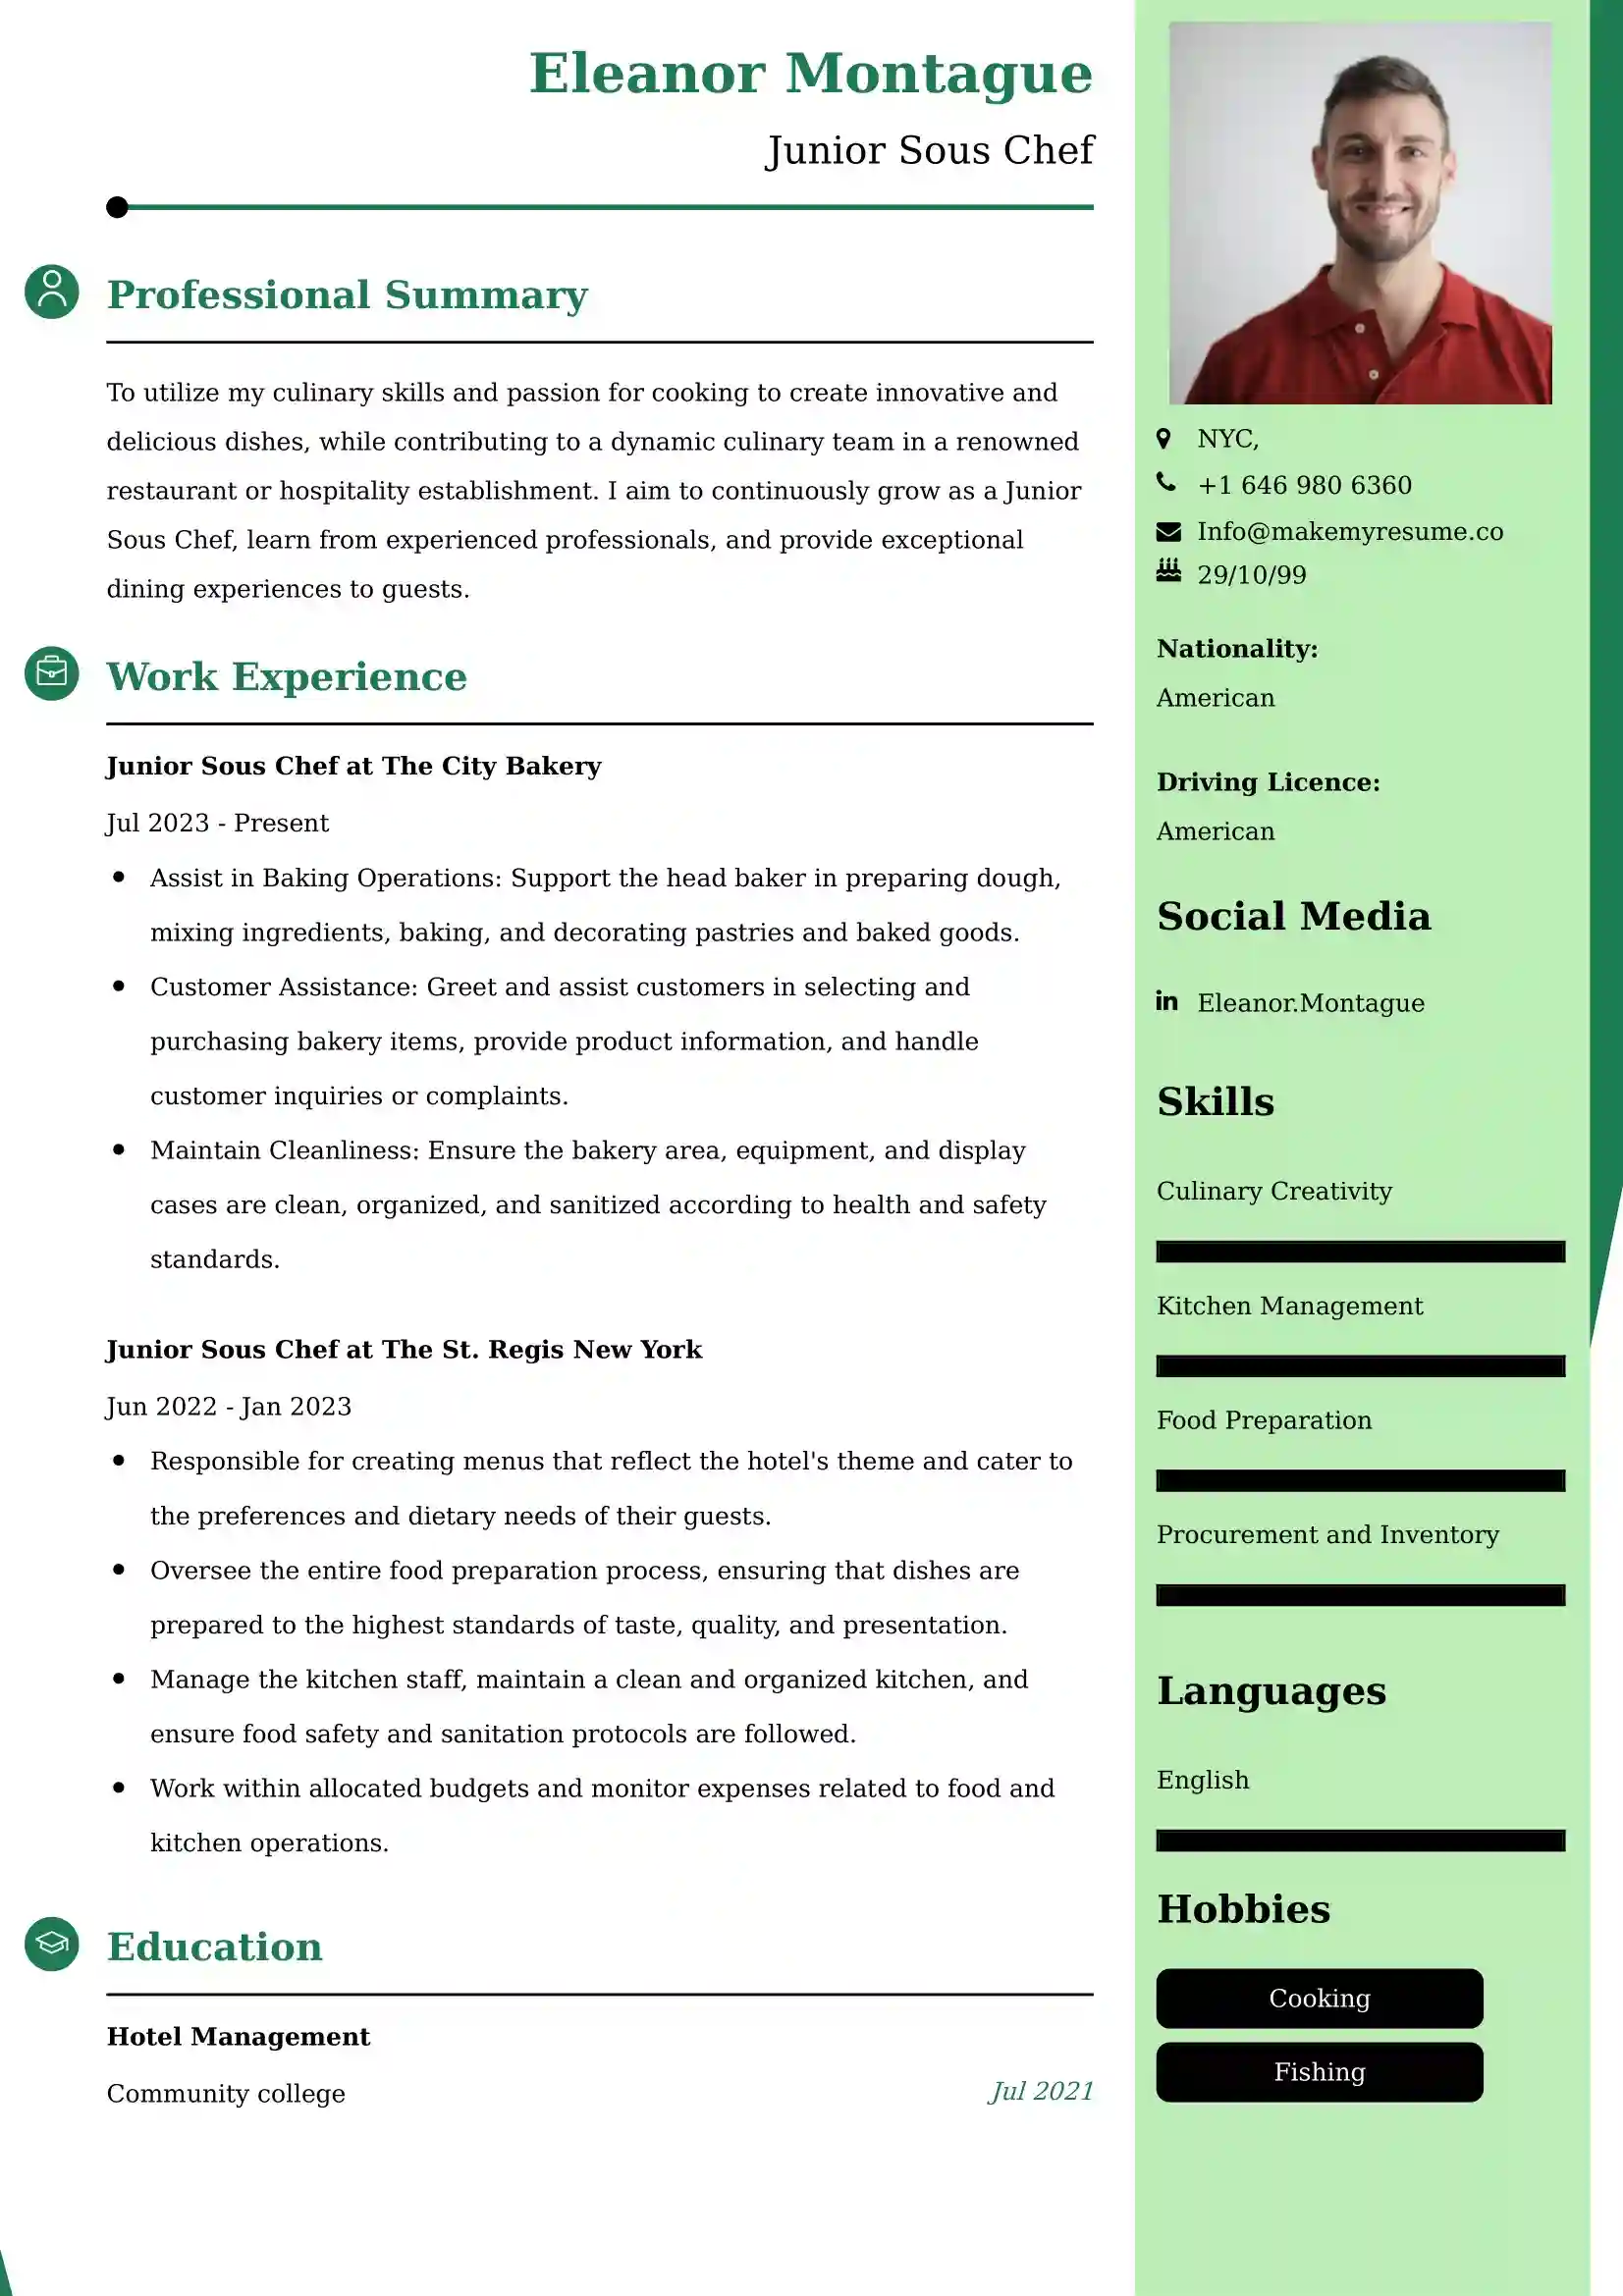 Junior Sous Chef Resume Examples - UK Format, Latest Template.